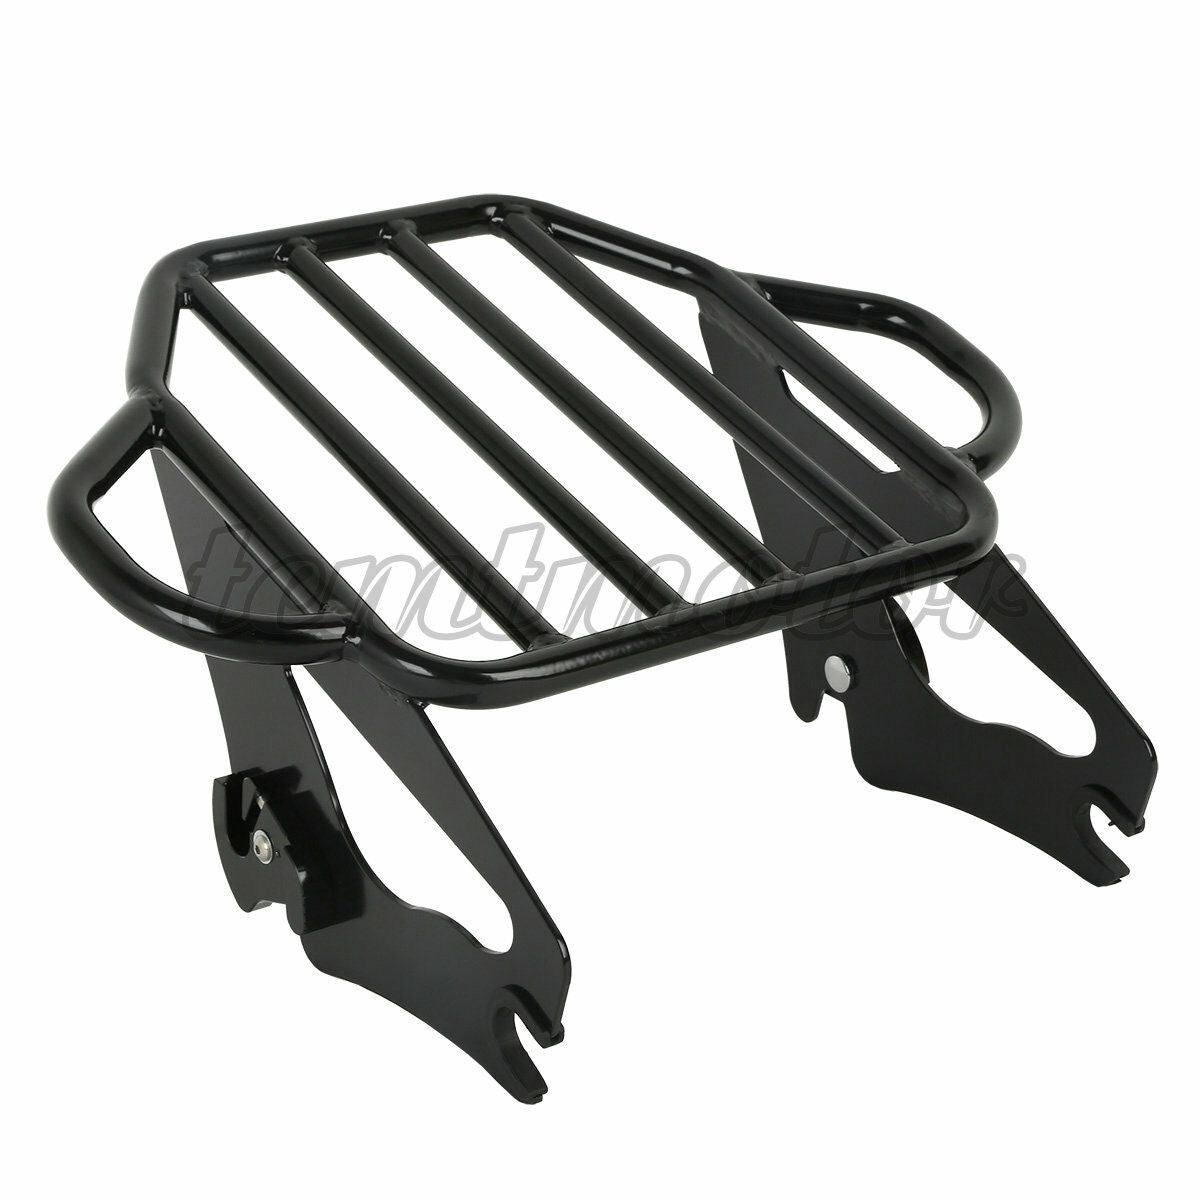 Detachable 2-Up Luggage Rack Fit For Harley Road King Street Electra Glide 09-21 - Moto Life Products